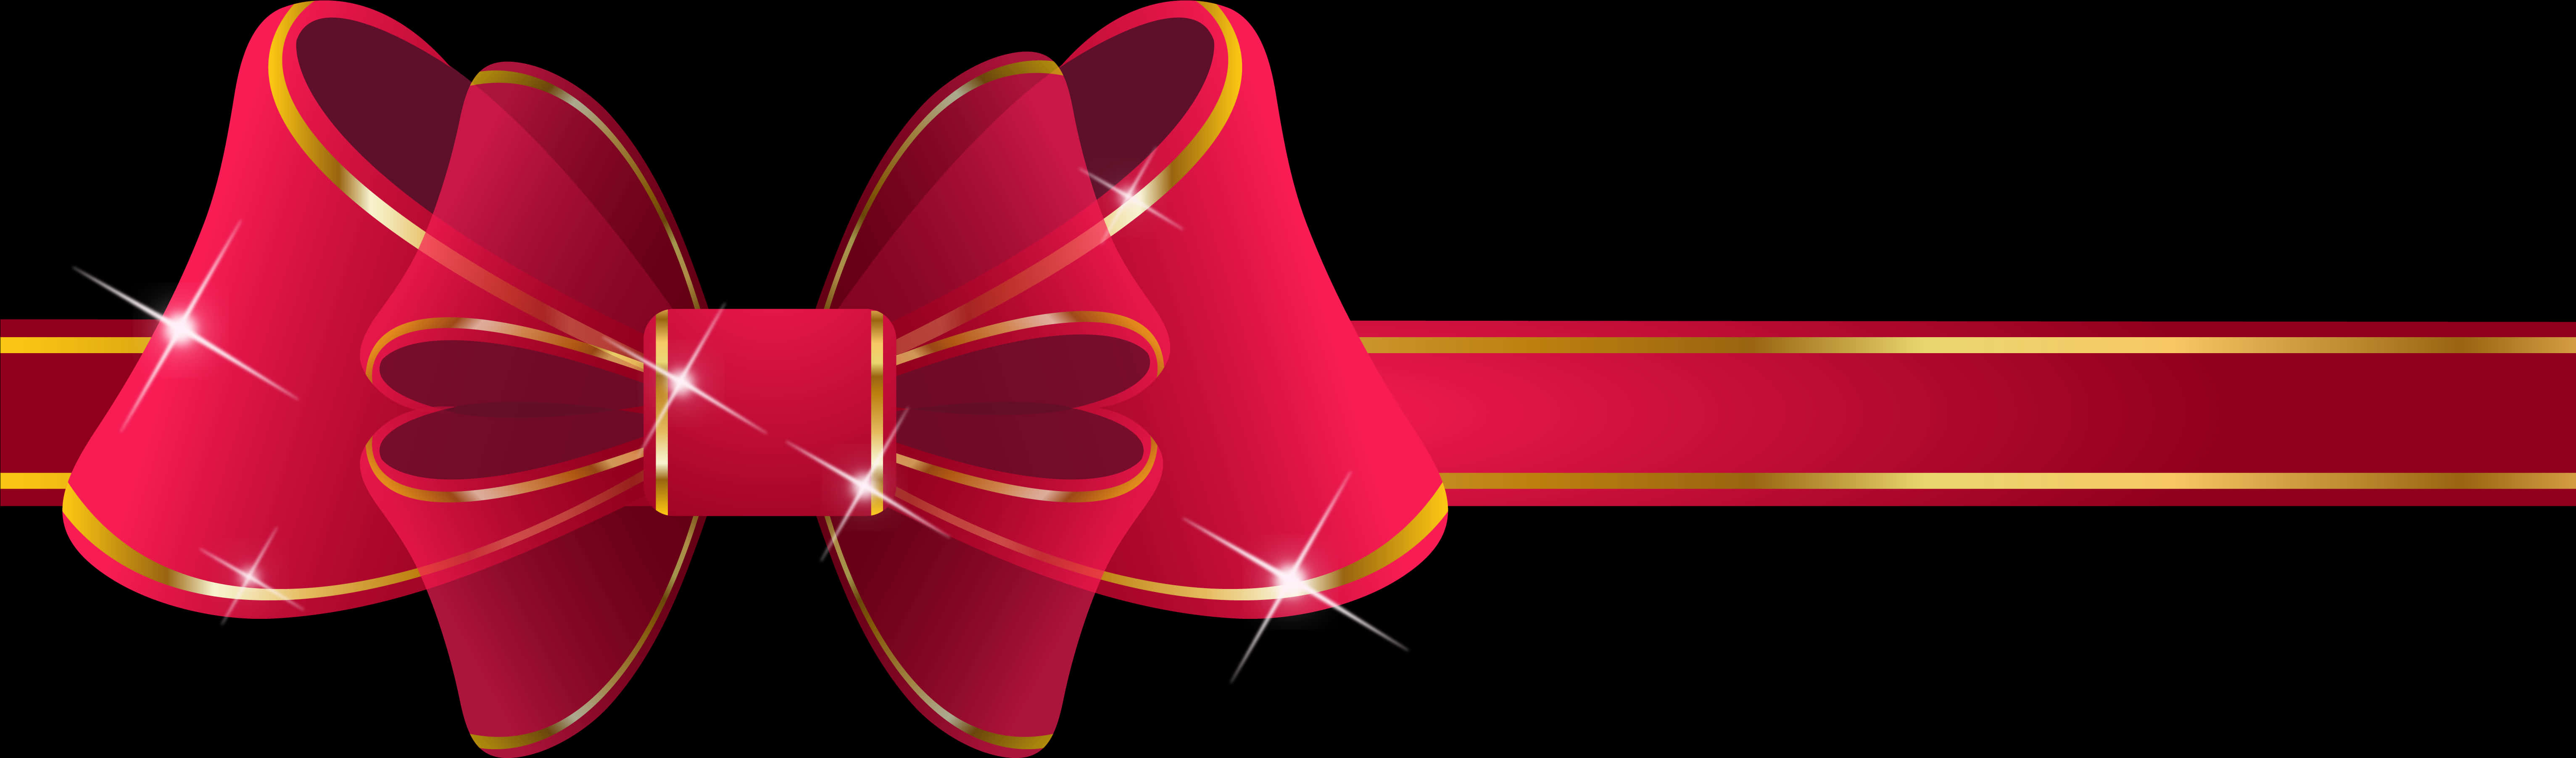 Red Gold Bow Ribbon Banner PNG